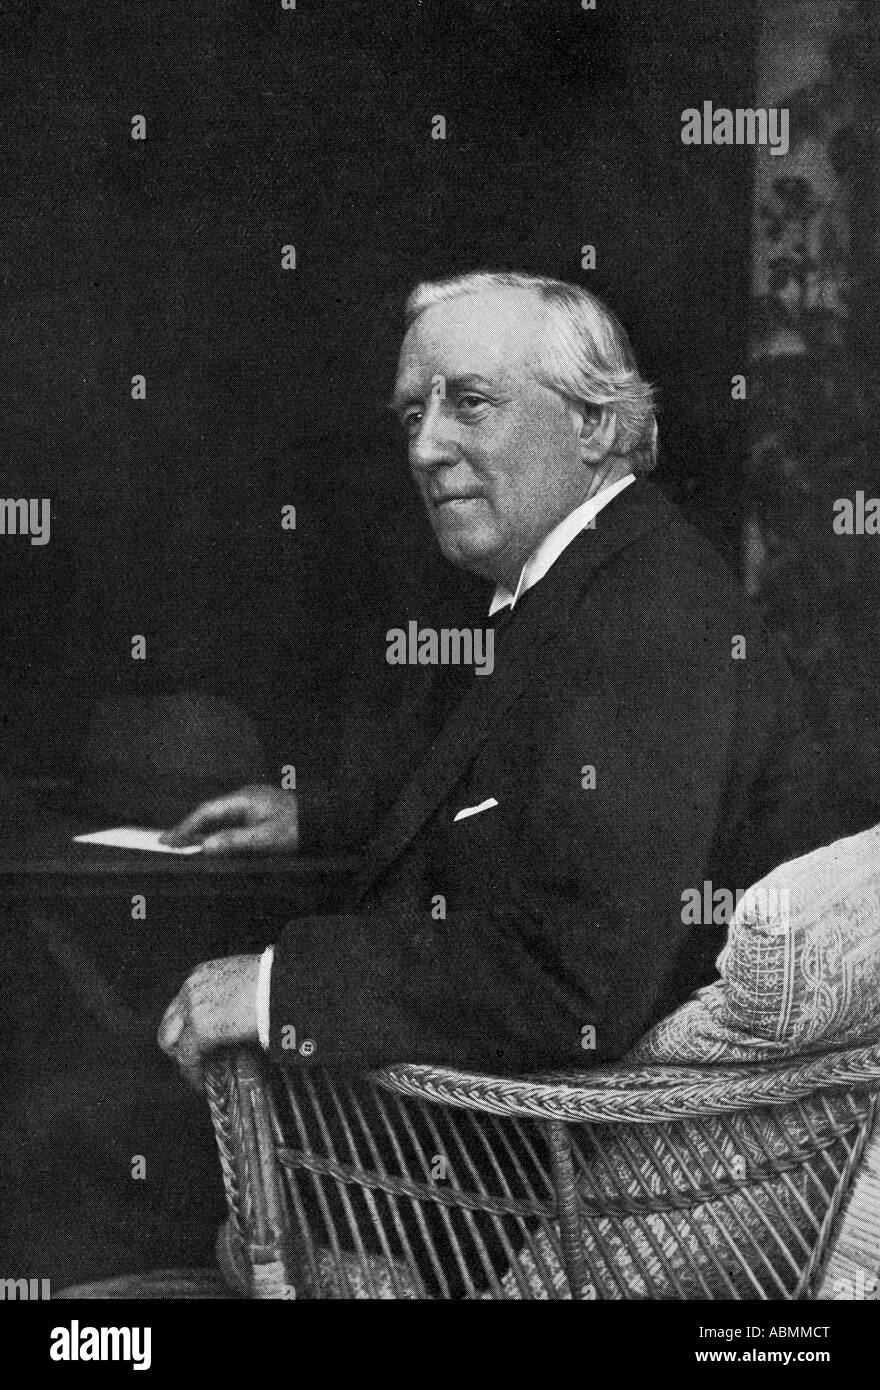 Herbert Henry Asquith, 1st Earl of Oxford and Asquith, 1852 - 1928.  British Liberal Prime Minister. Stock Photo